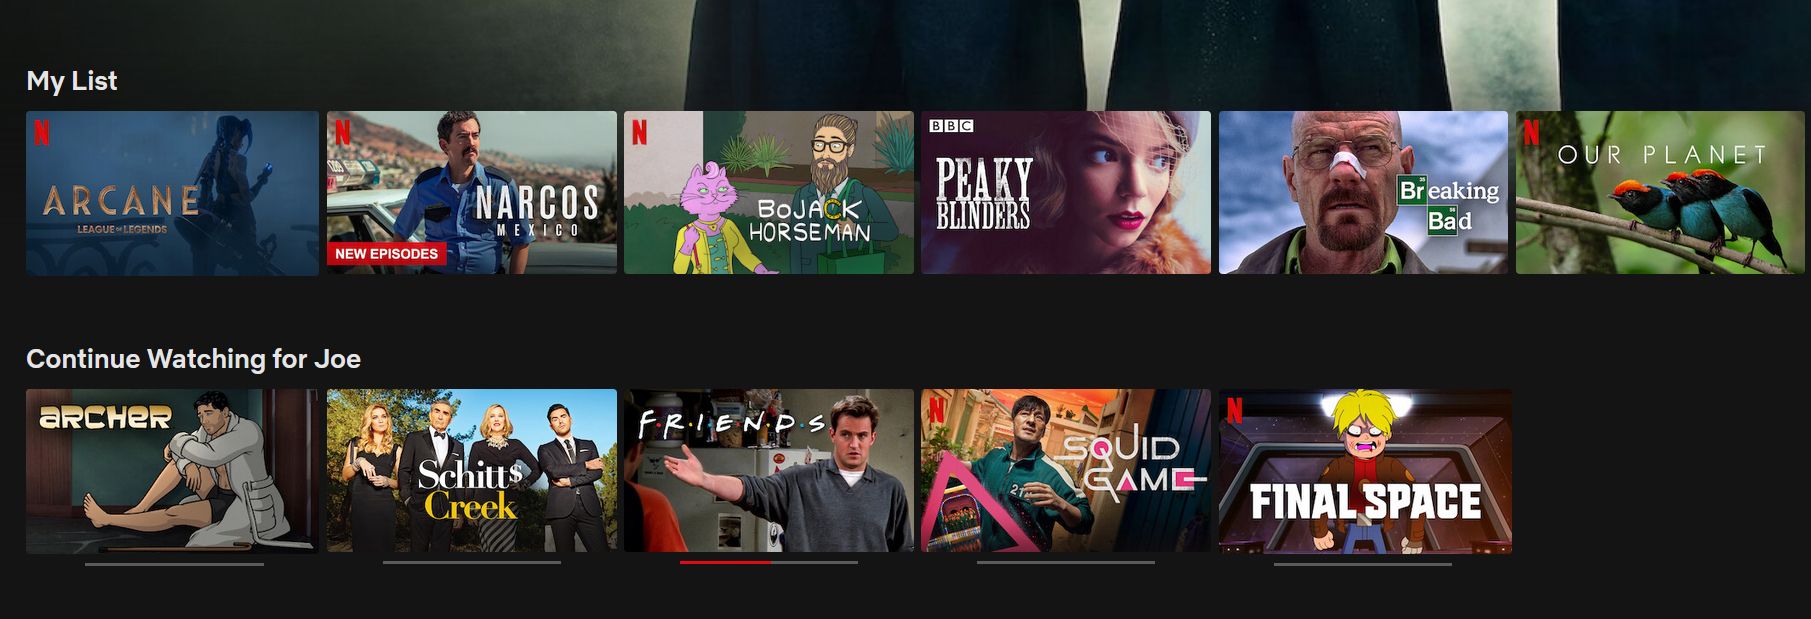 netflix my list and continue watching